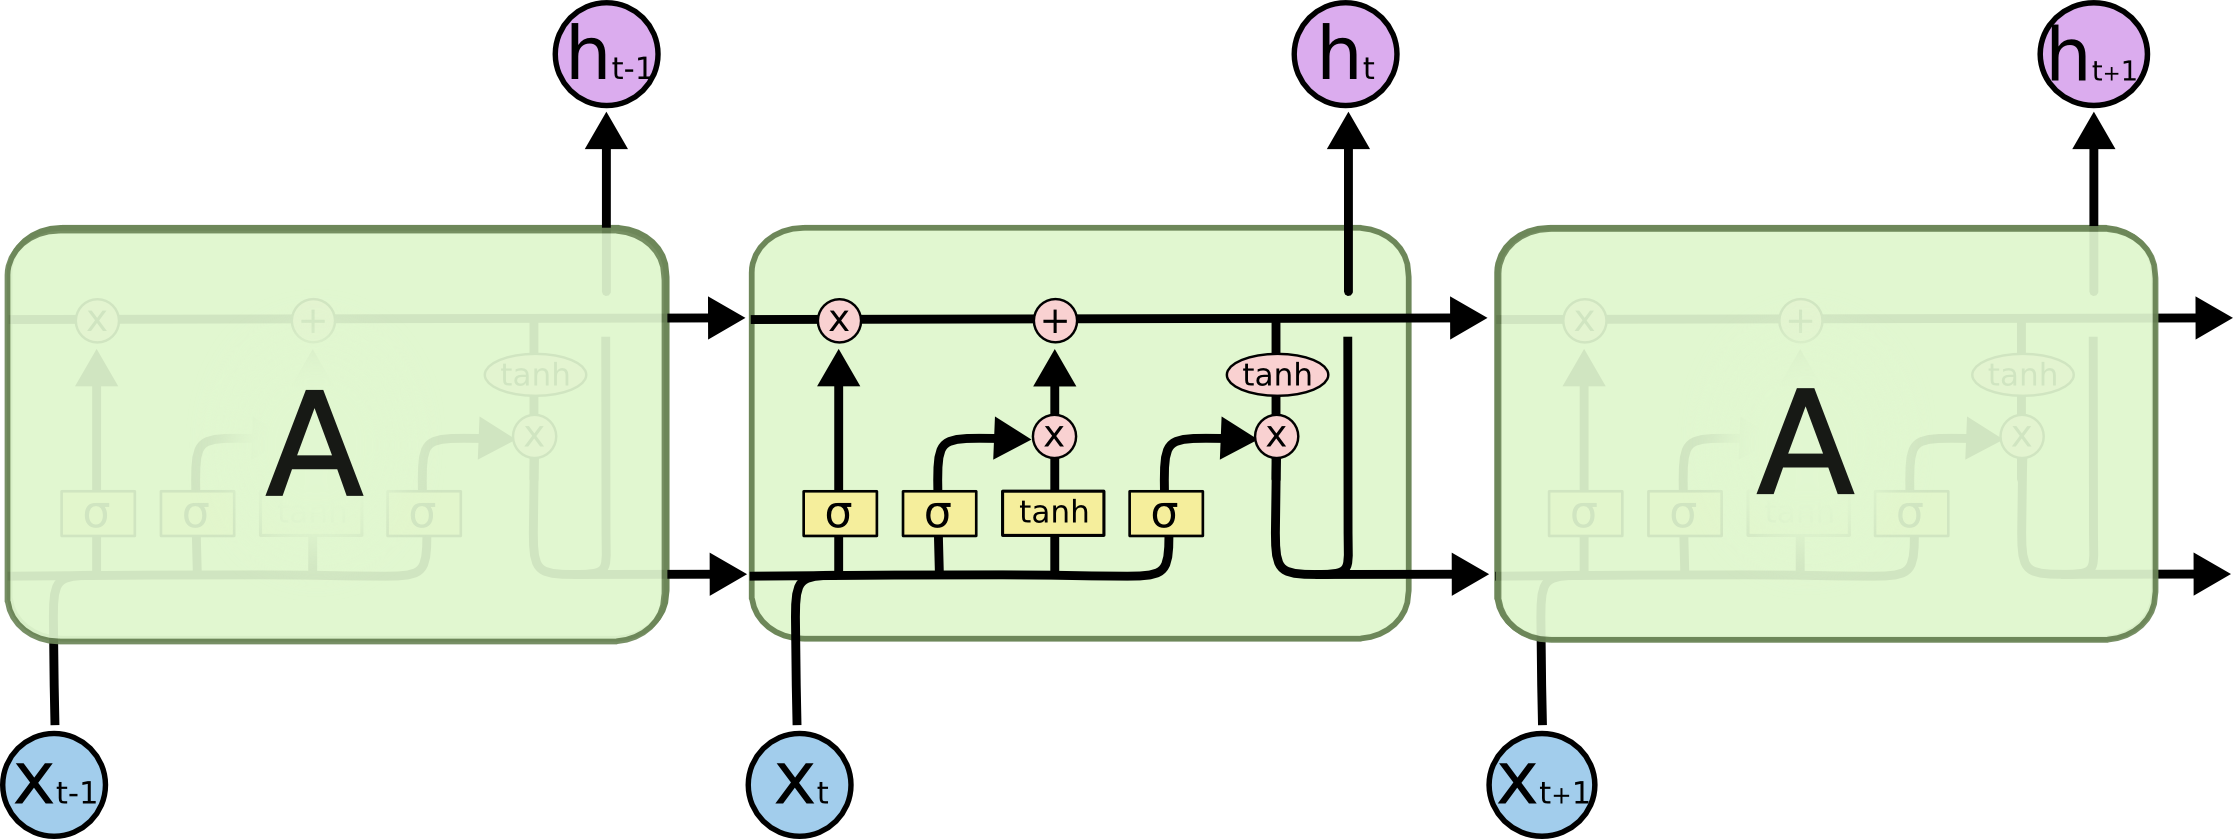 LSTM3-chain.png